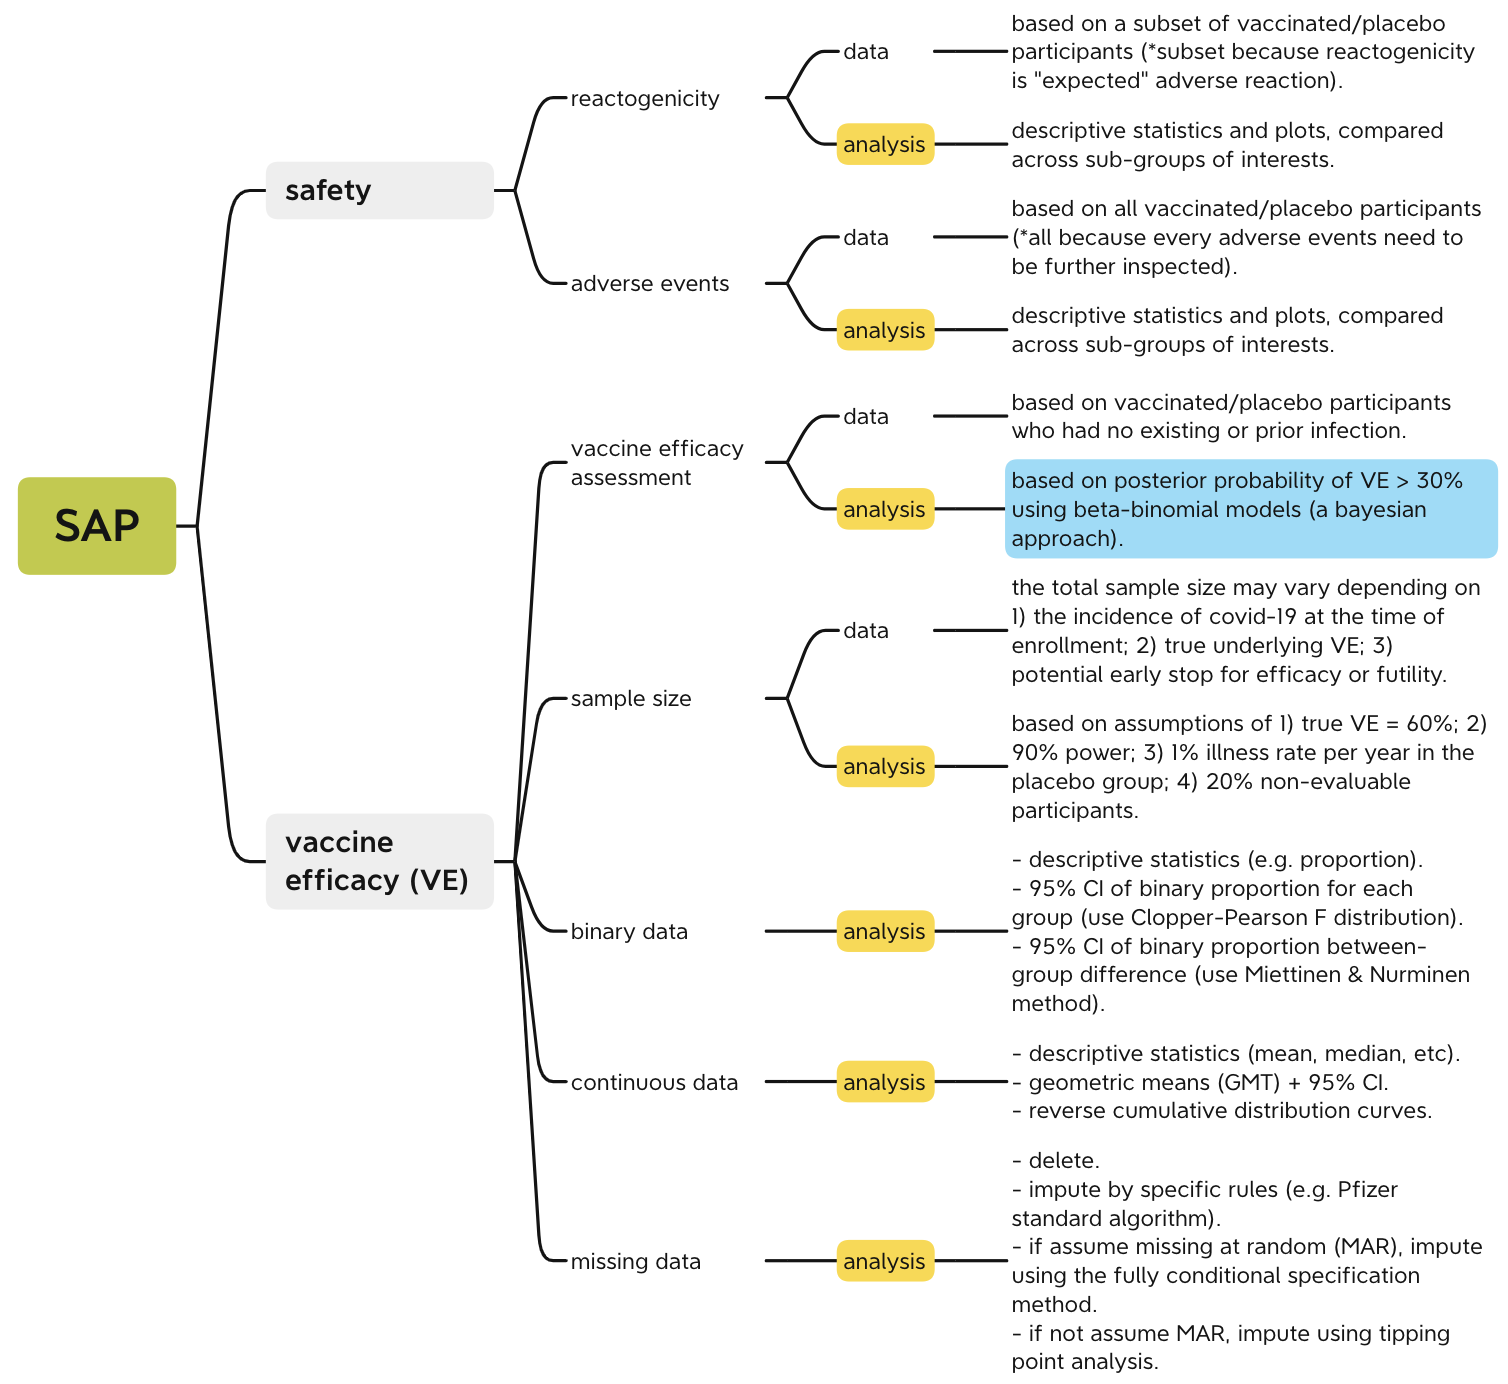 Figure 1: mind-map of the statistical analysis plan (click to zoom in)